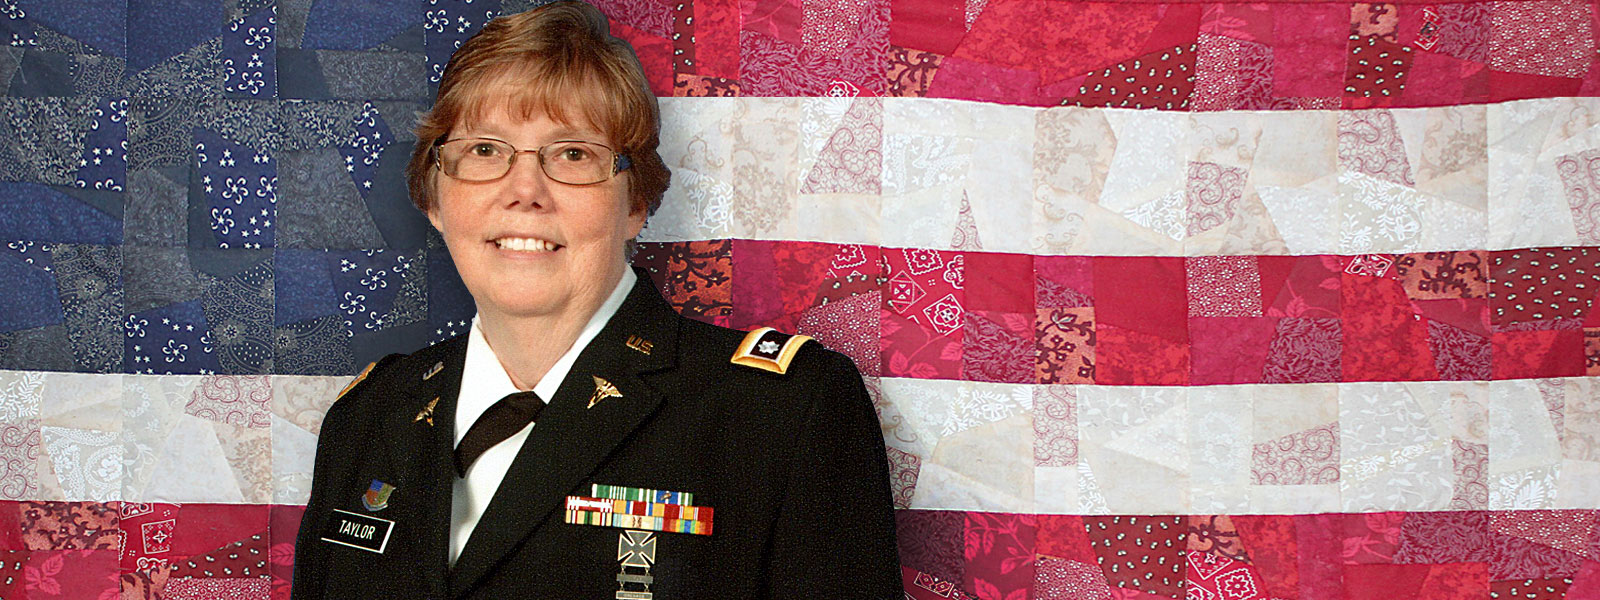 Patti Taylor, '93, UW 2018 Distinguished Alumni Veteran Award recipient, with patched-fabric mosaic reminiscent of the U.S. flag in background.